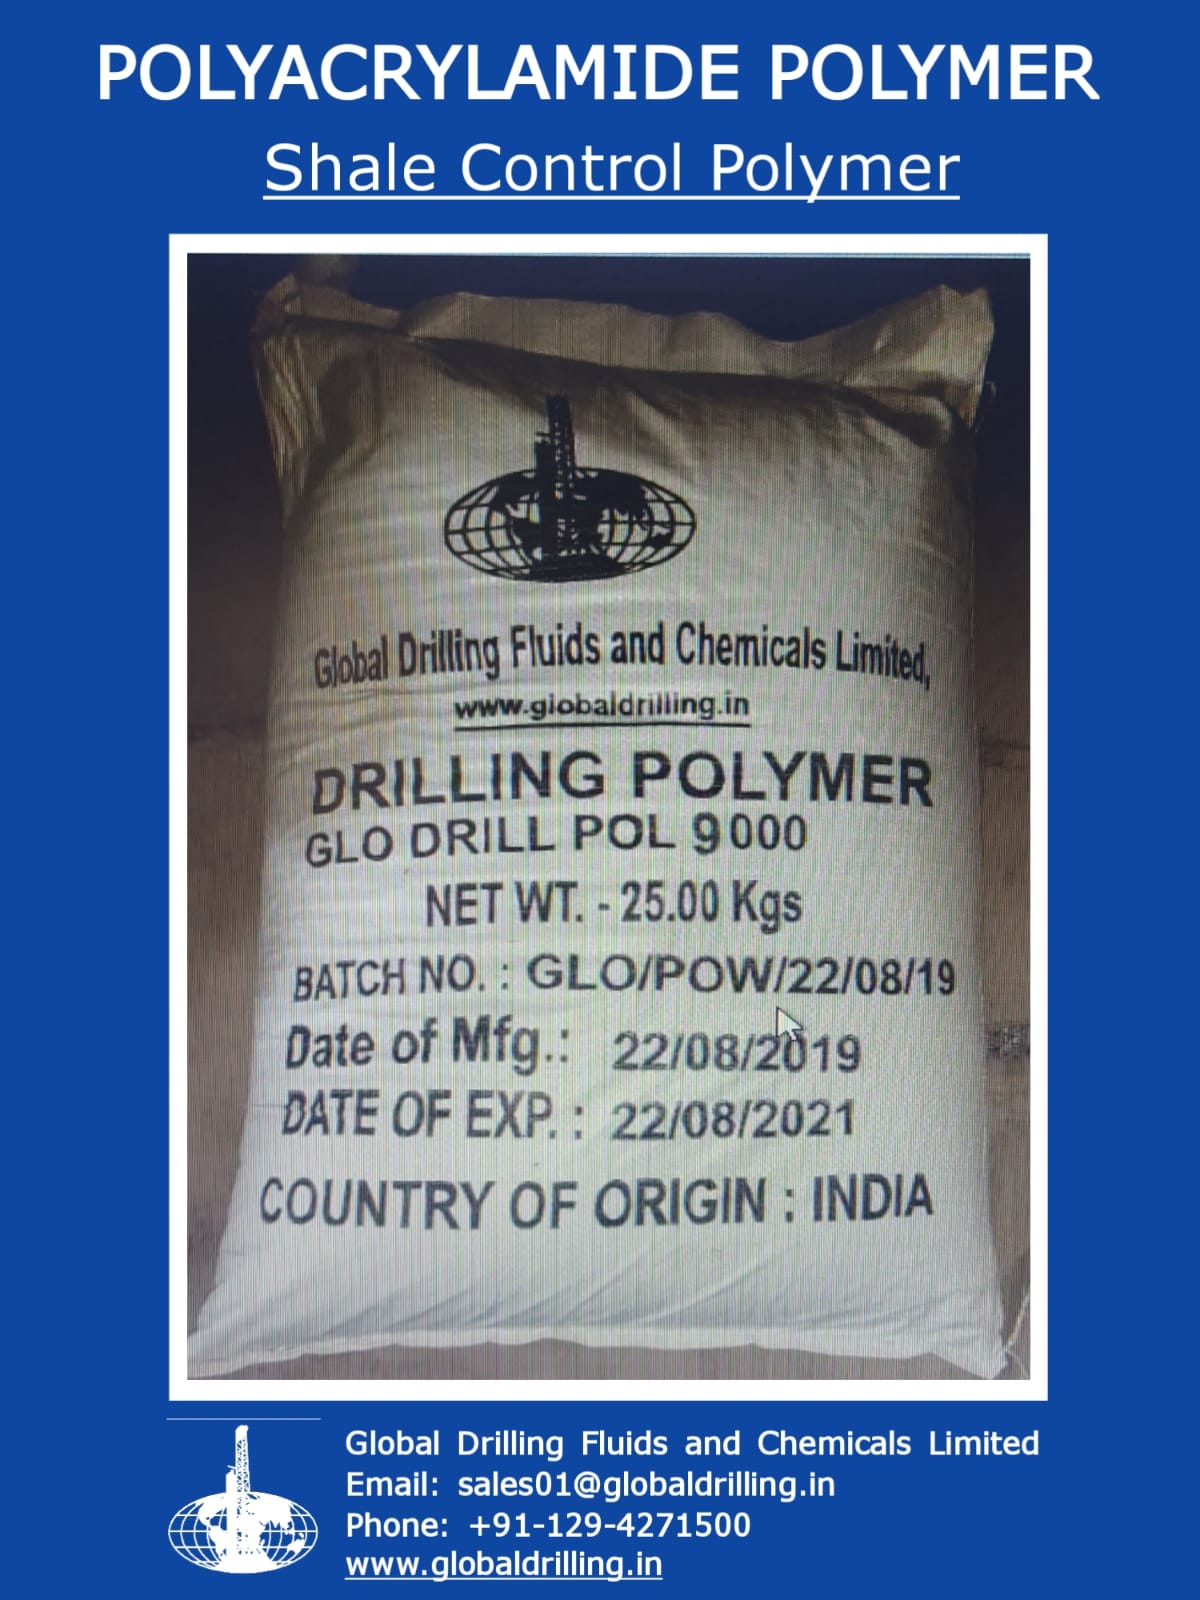 PHPA DRILLING POLYMER